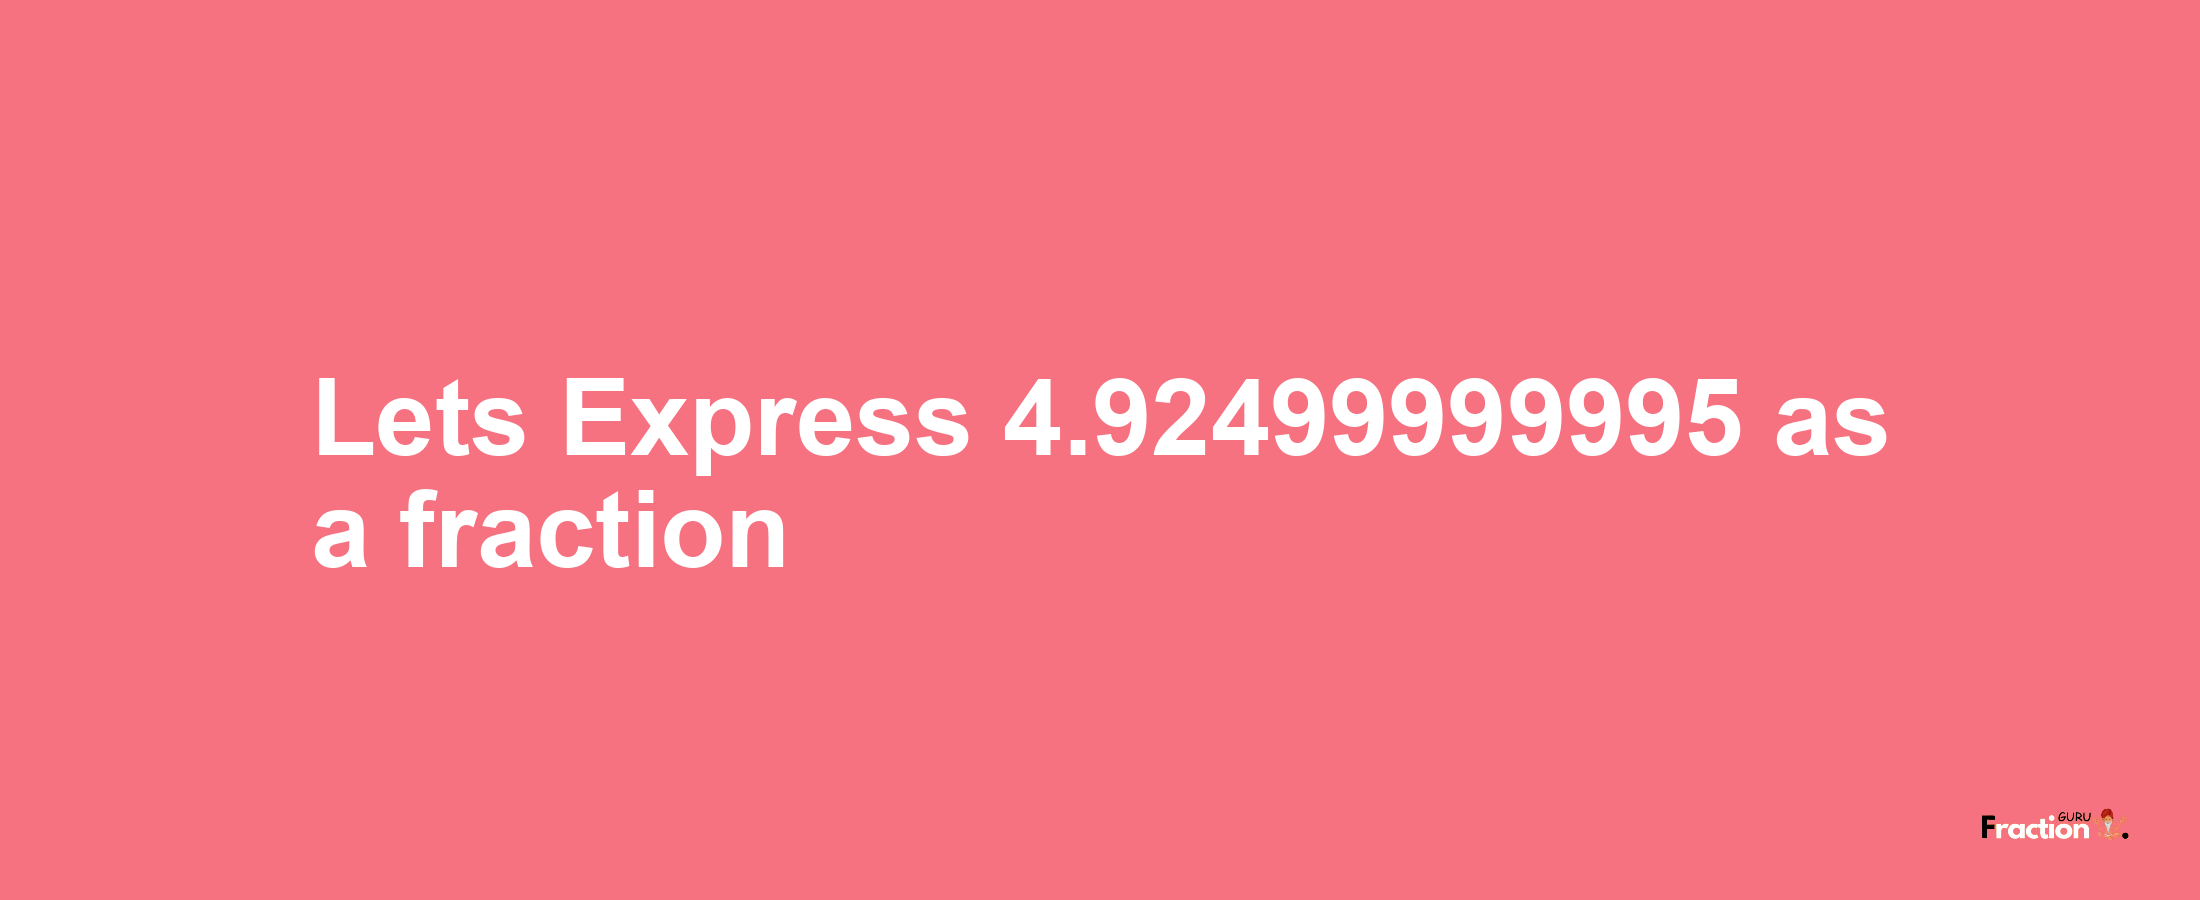 Lets Express 4.92499999995 as afraction